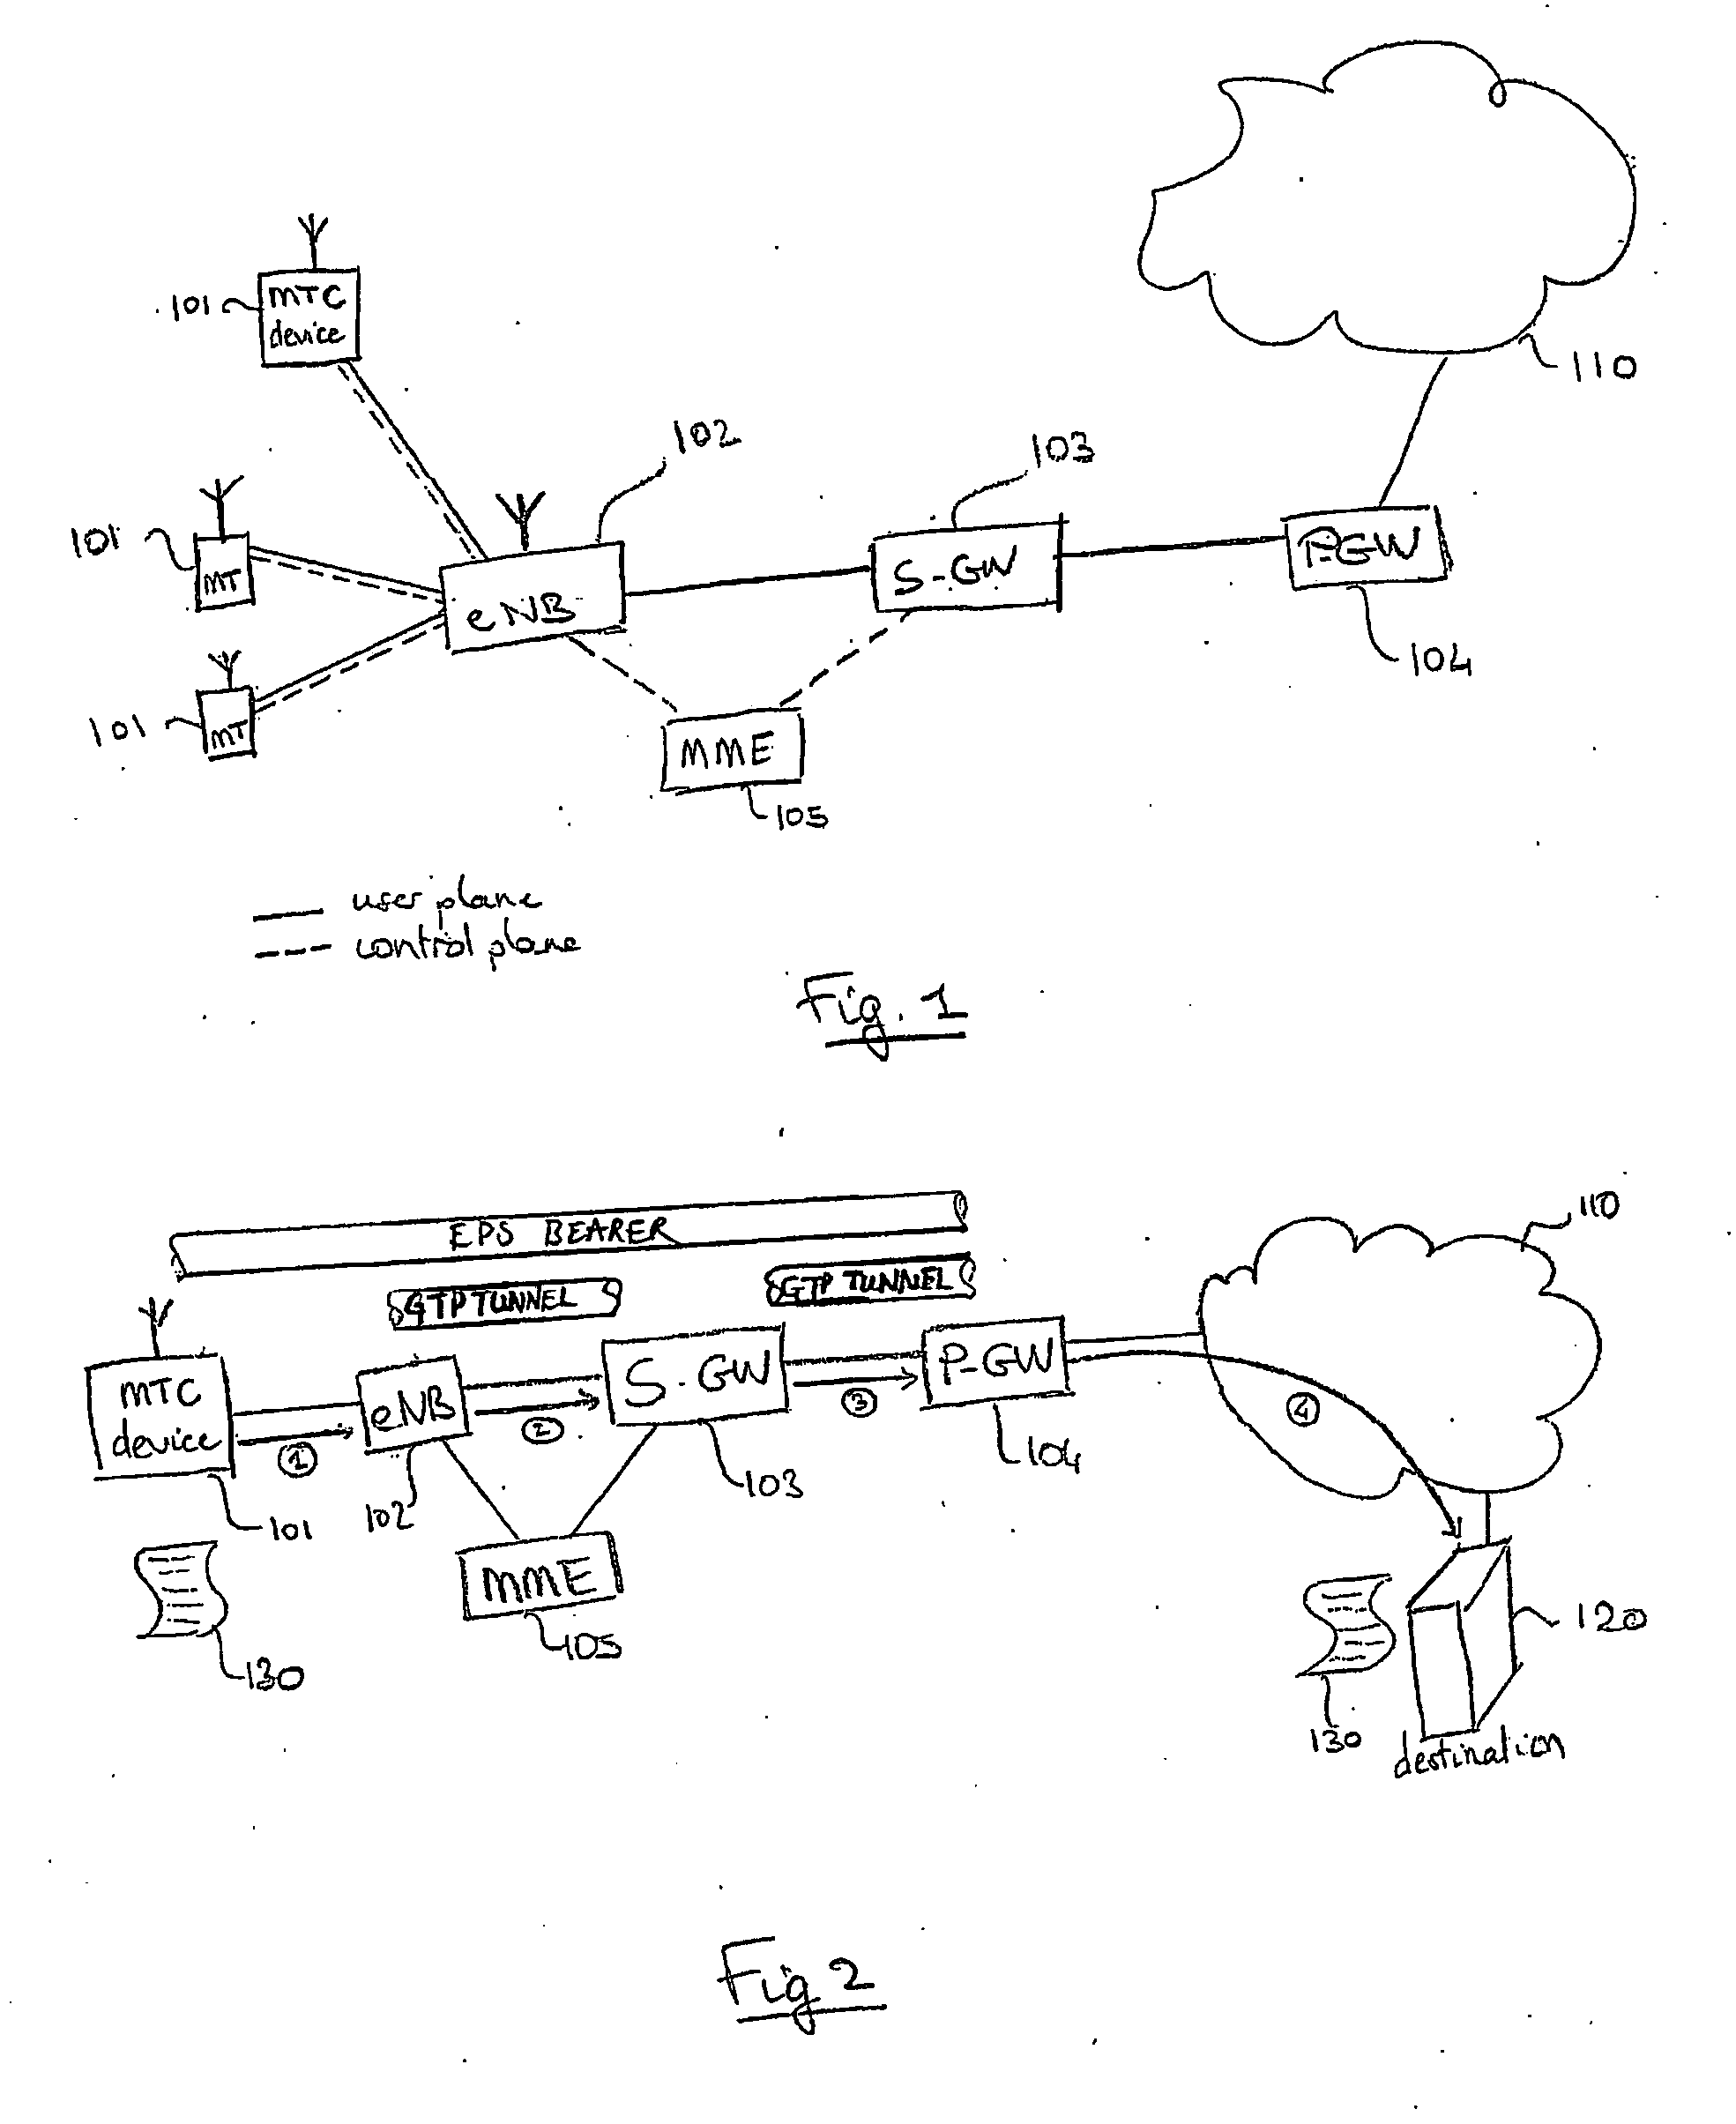 Mobile communications network, infrastructure equipment and method